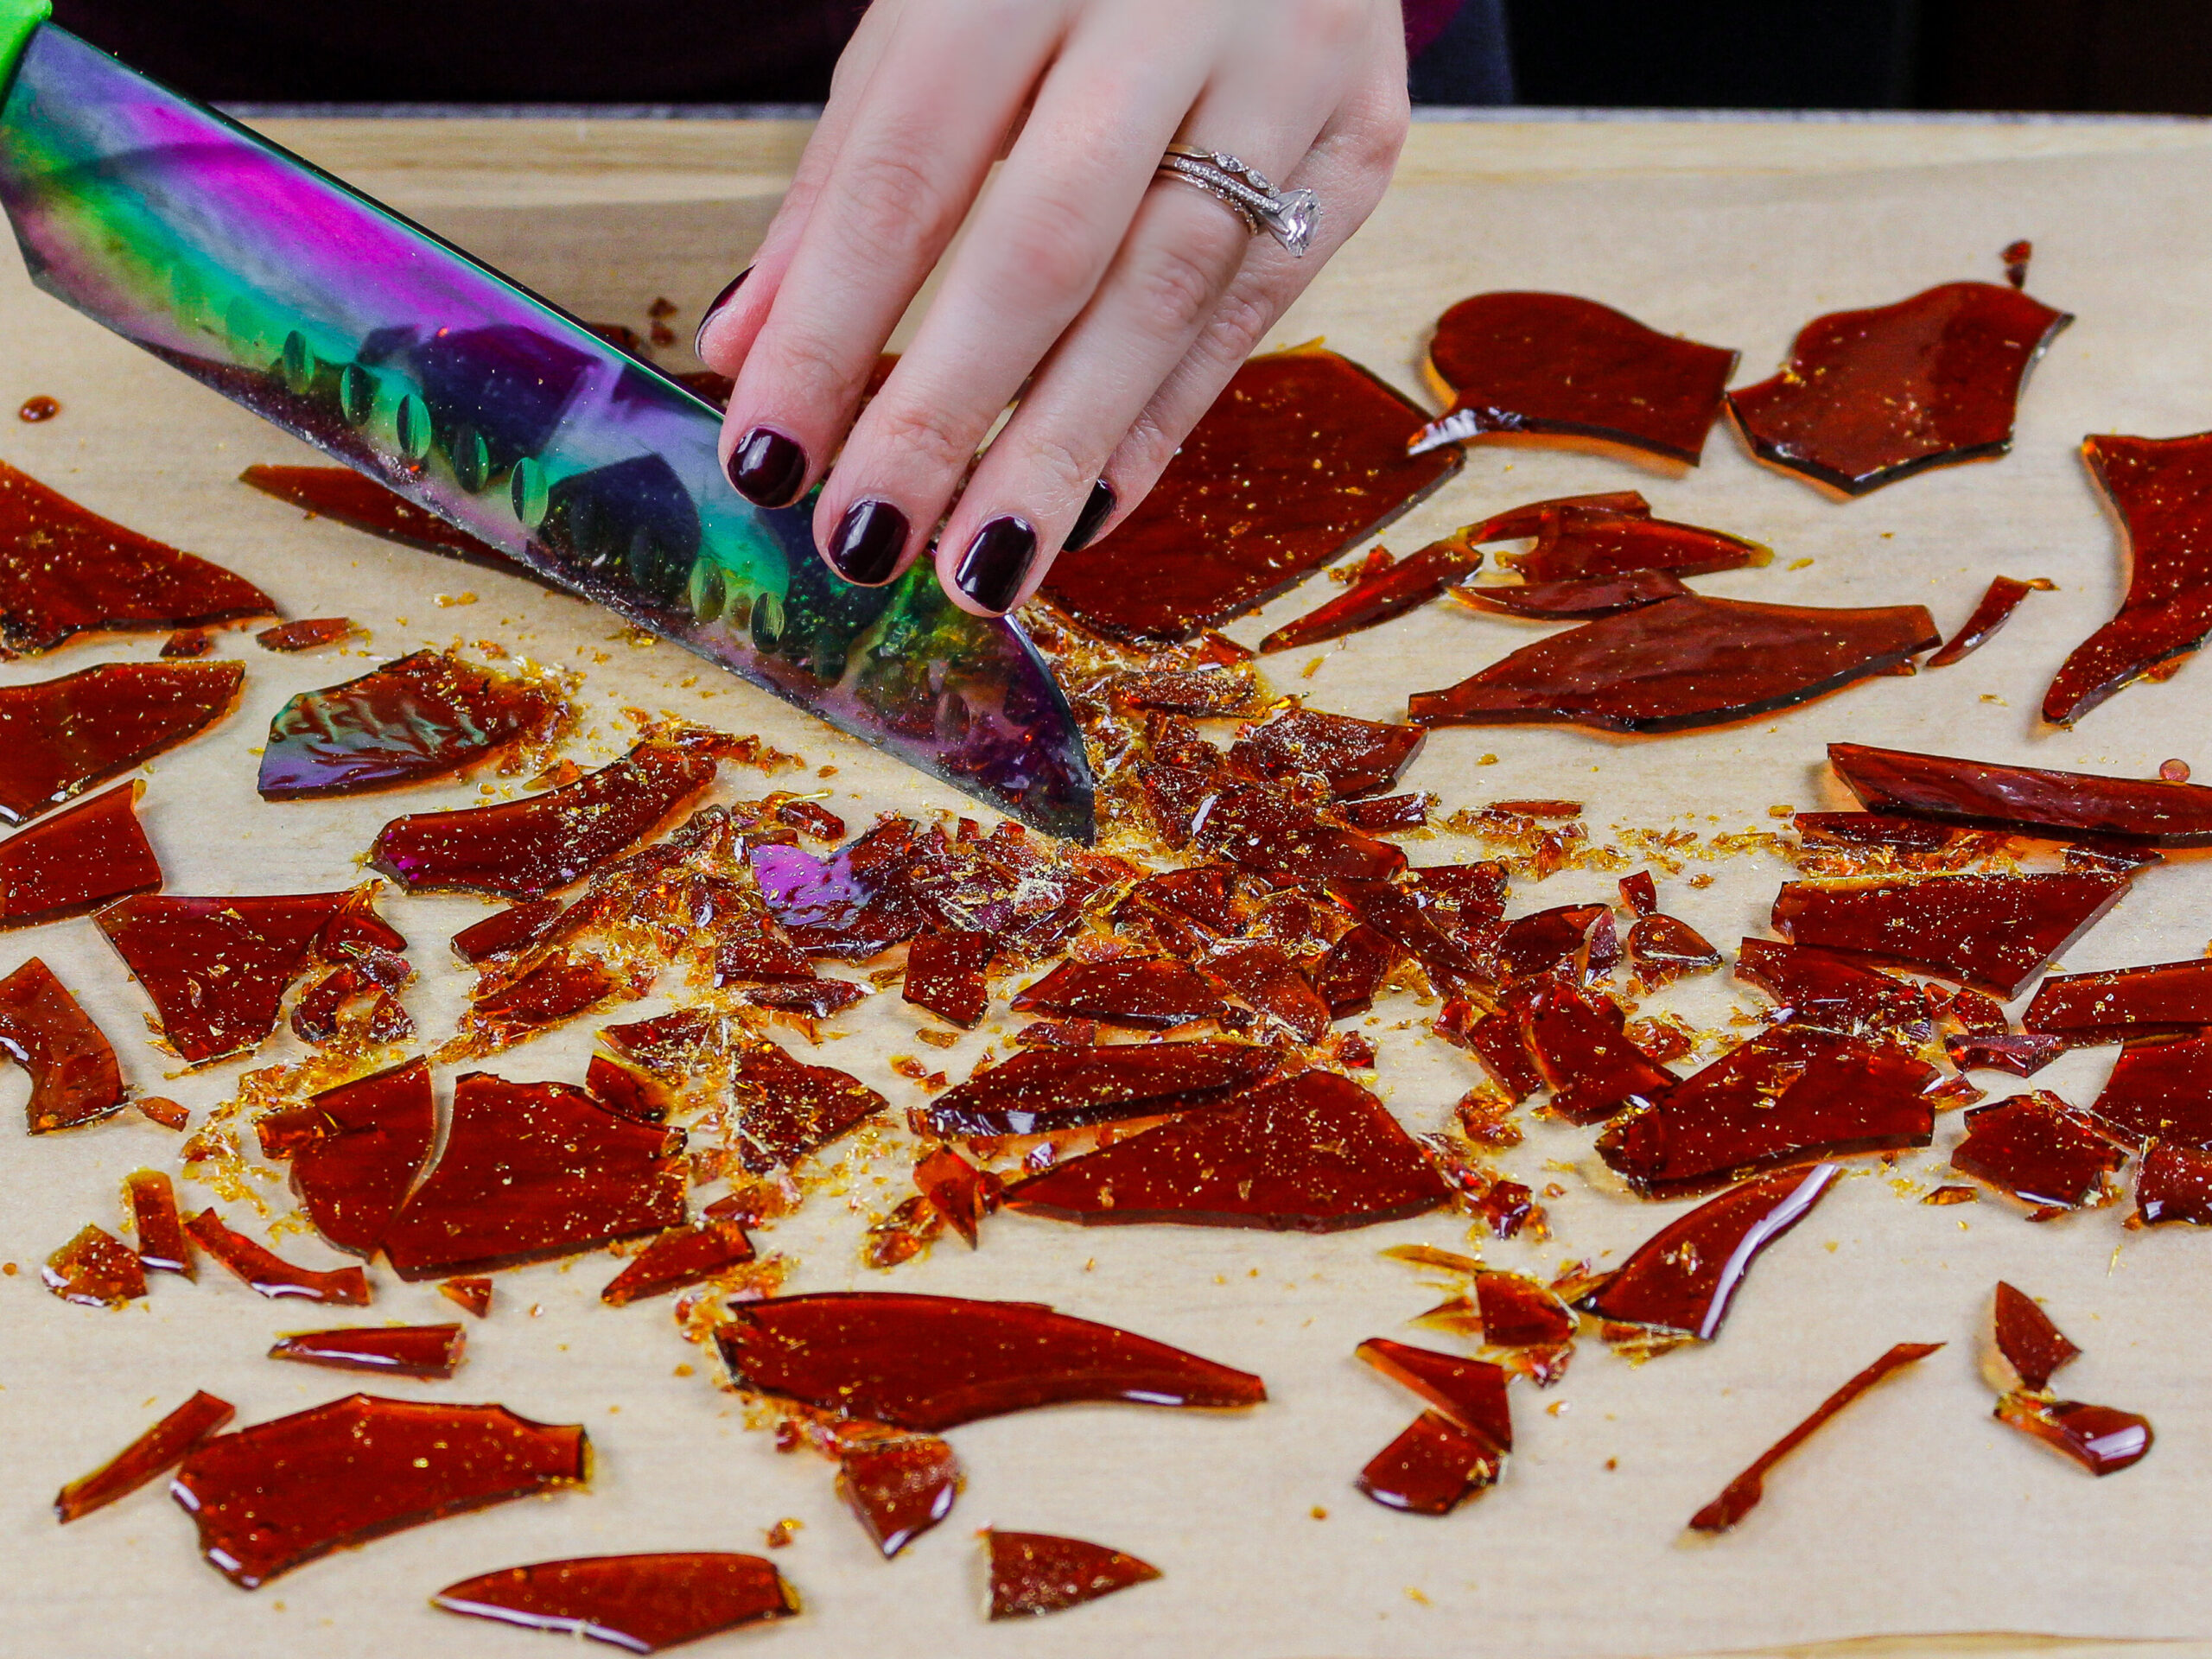 image of caramelized sugar shards being cut into small pieces using a sharp knife